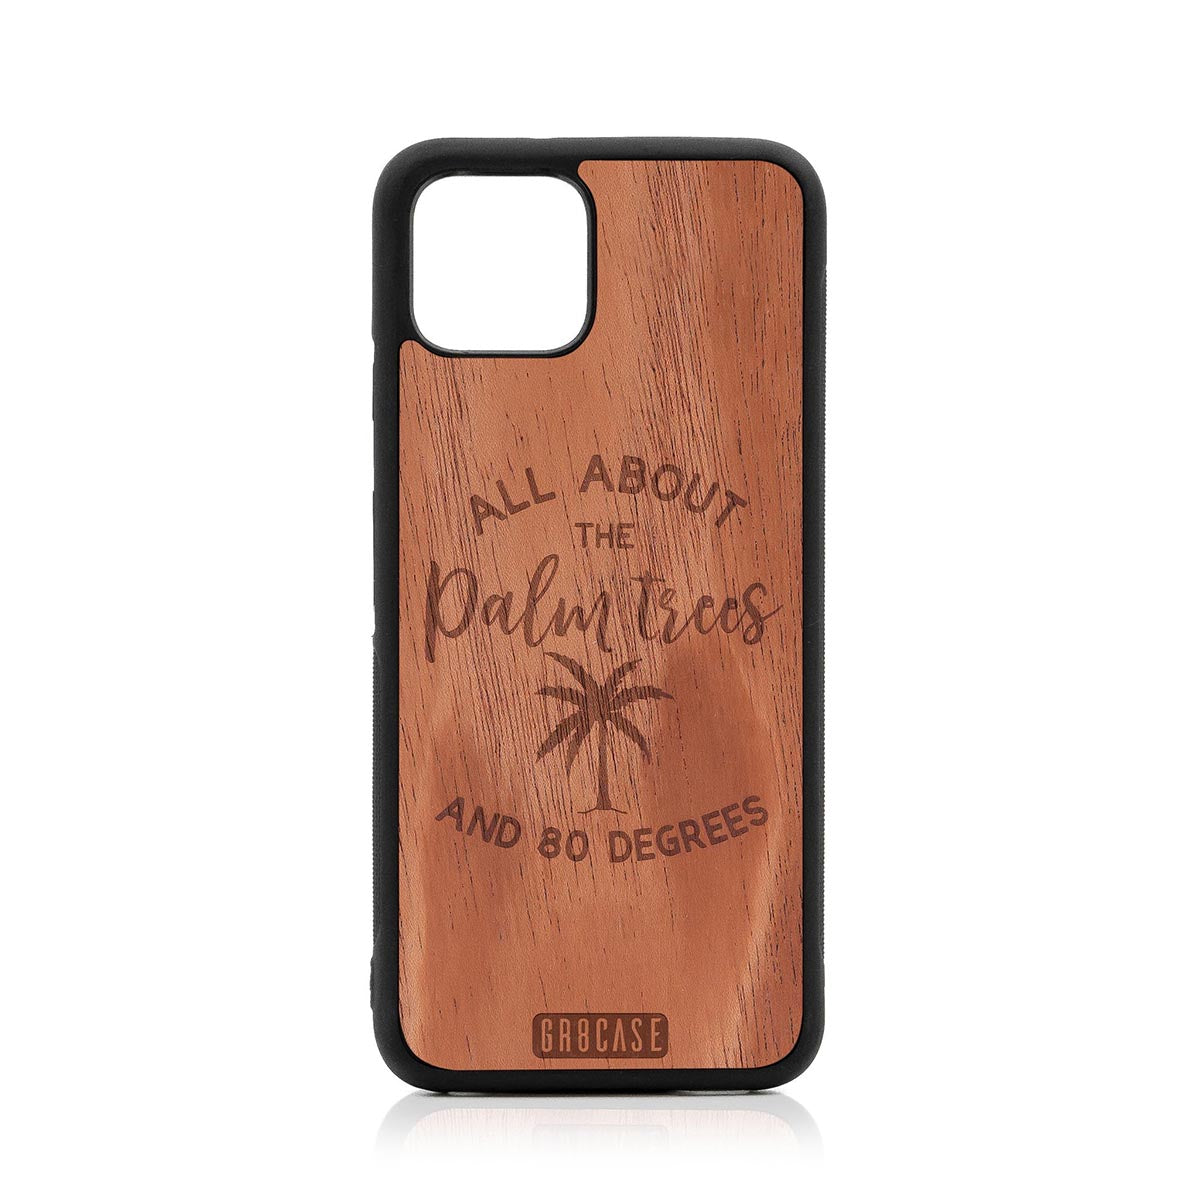 All About The Palm Trees and 80 Degrees Design Wood Case For Google Pixel 4 by GR8CASE